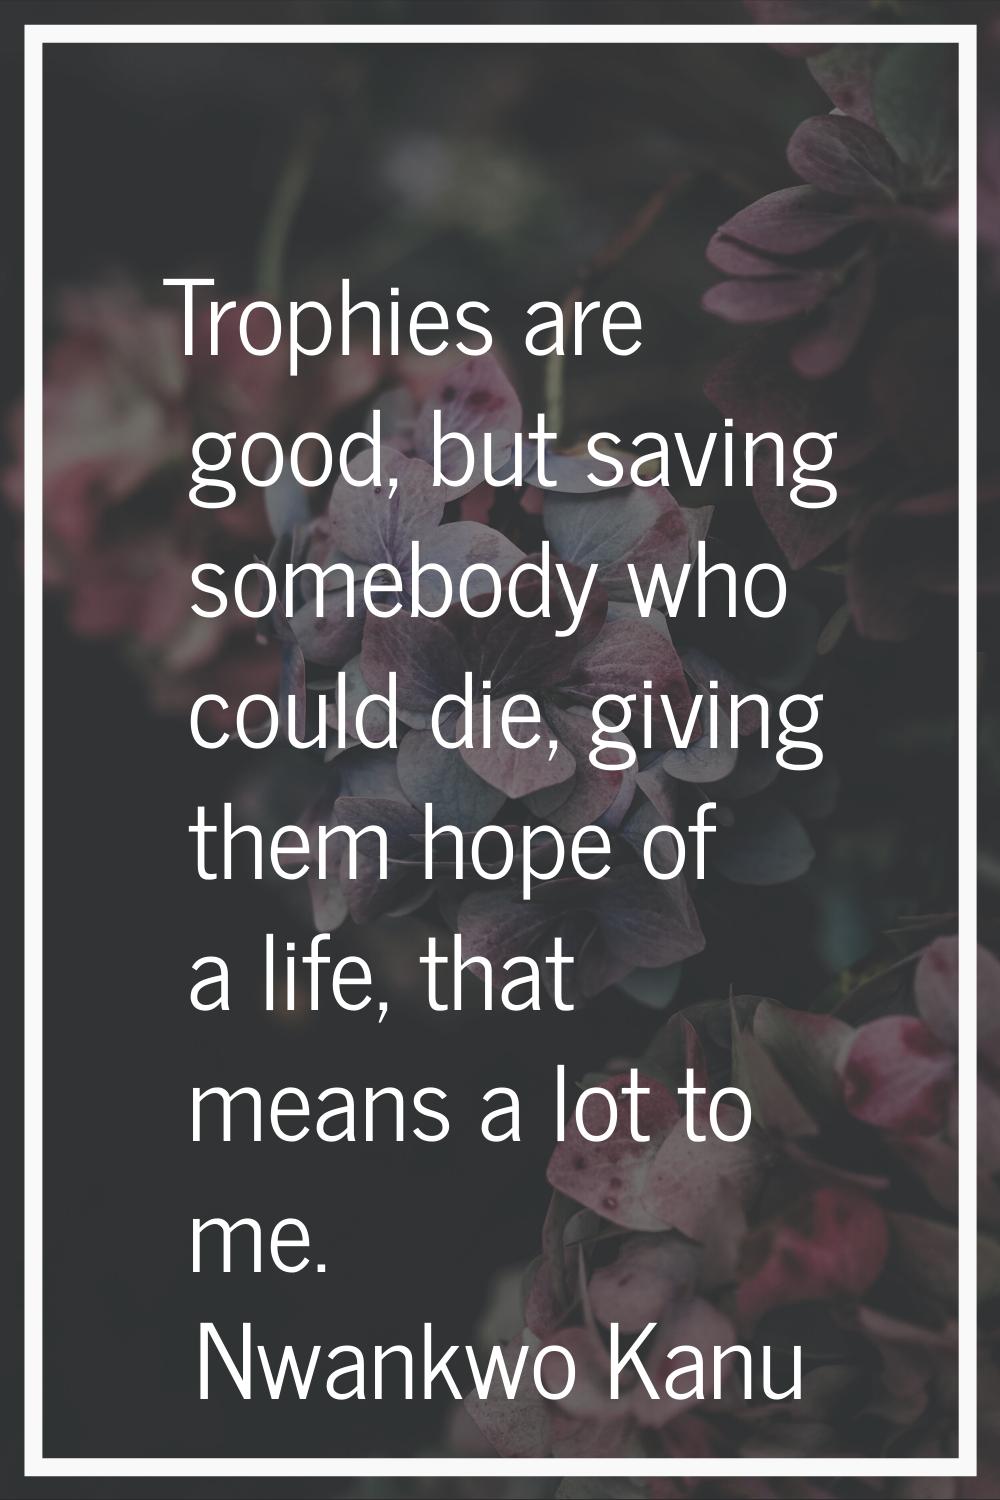 Trophies are good, but saving somebody who could die, giving them hope of a life, that means a lot 